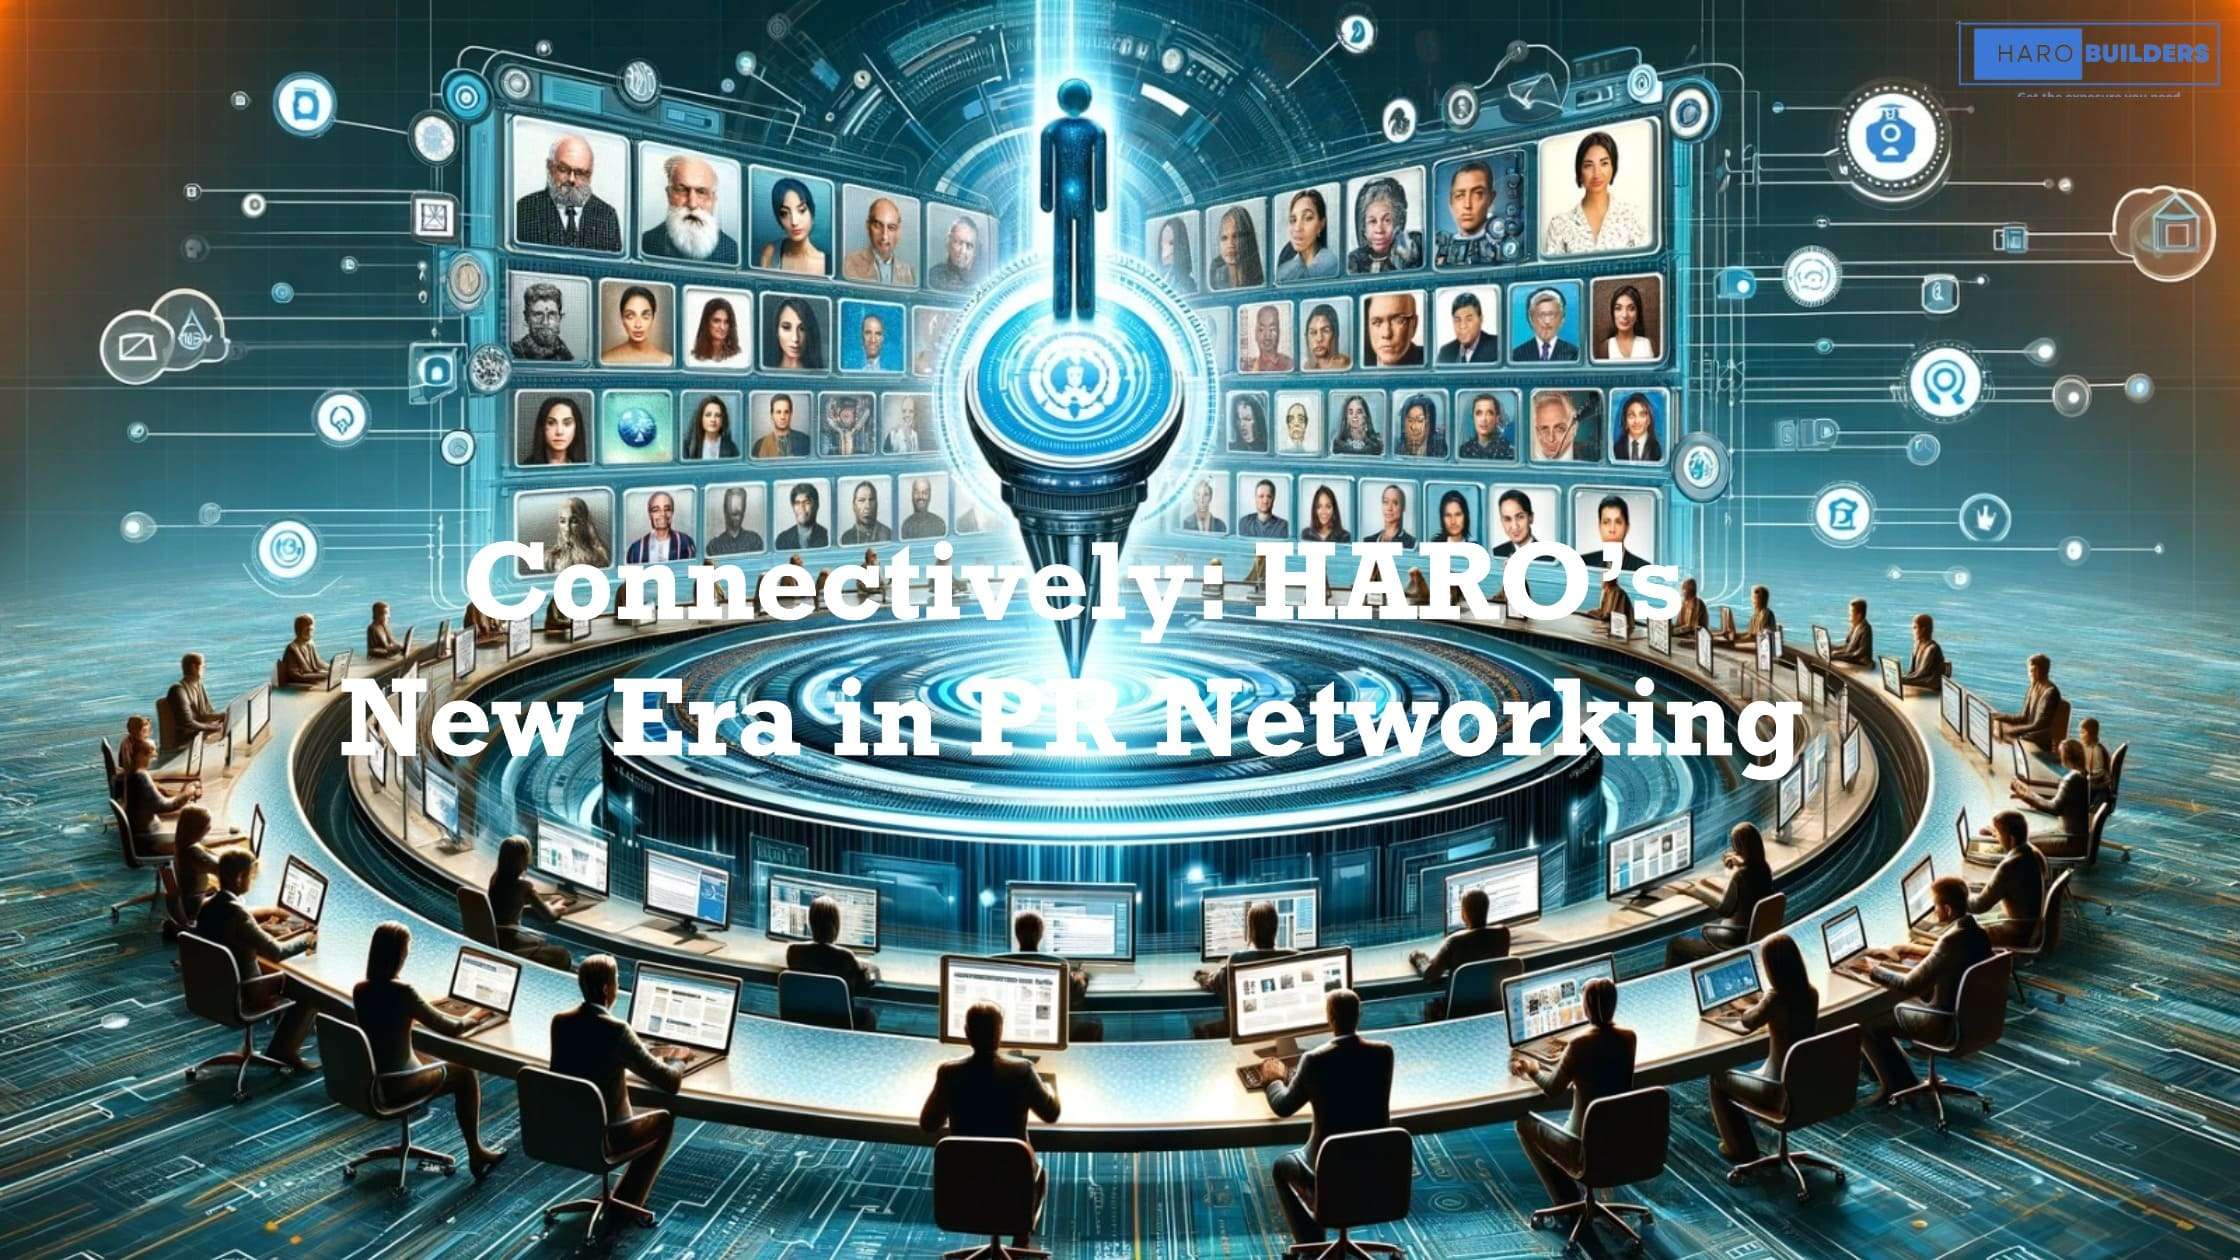 Connectively HARO’s New Era in PR Networking